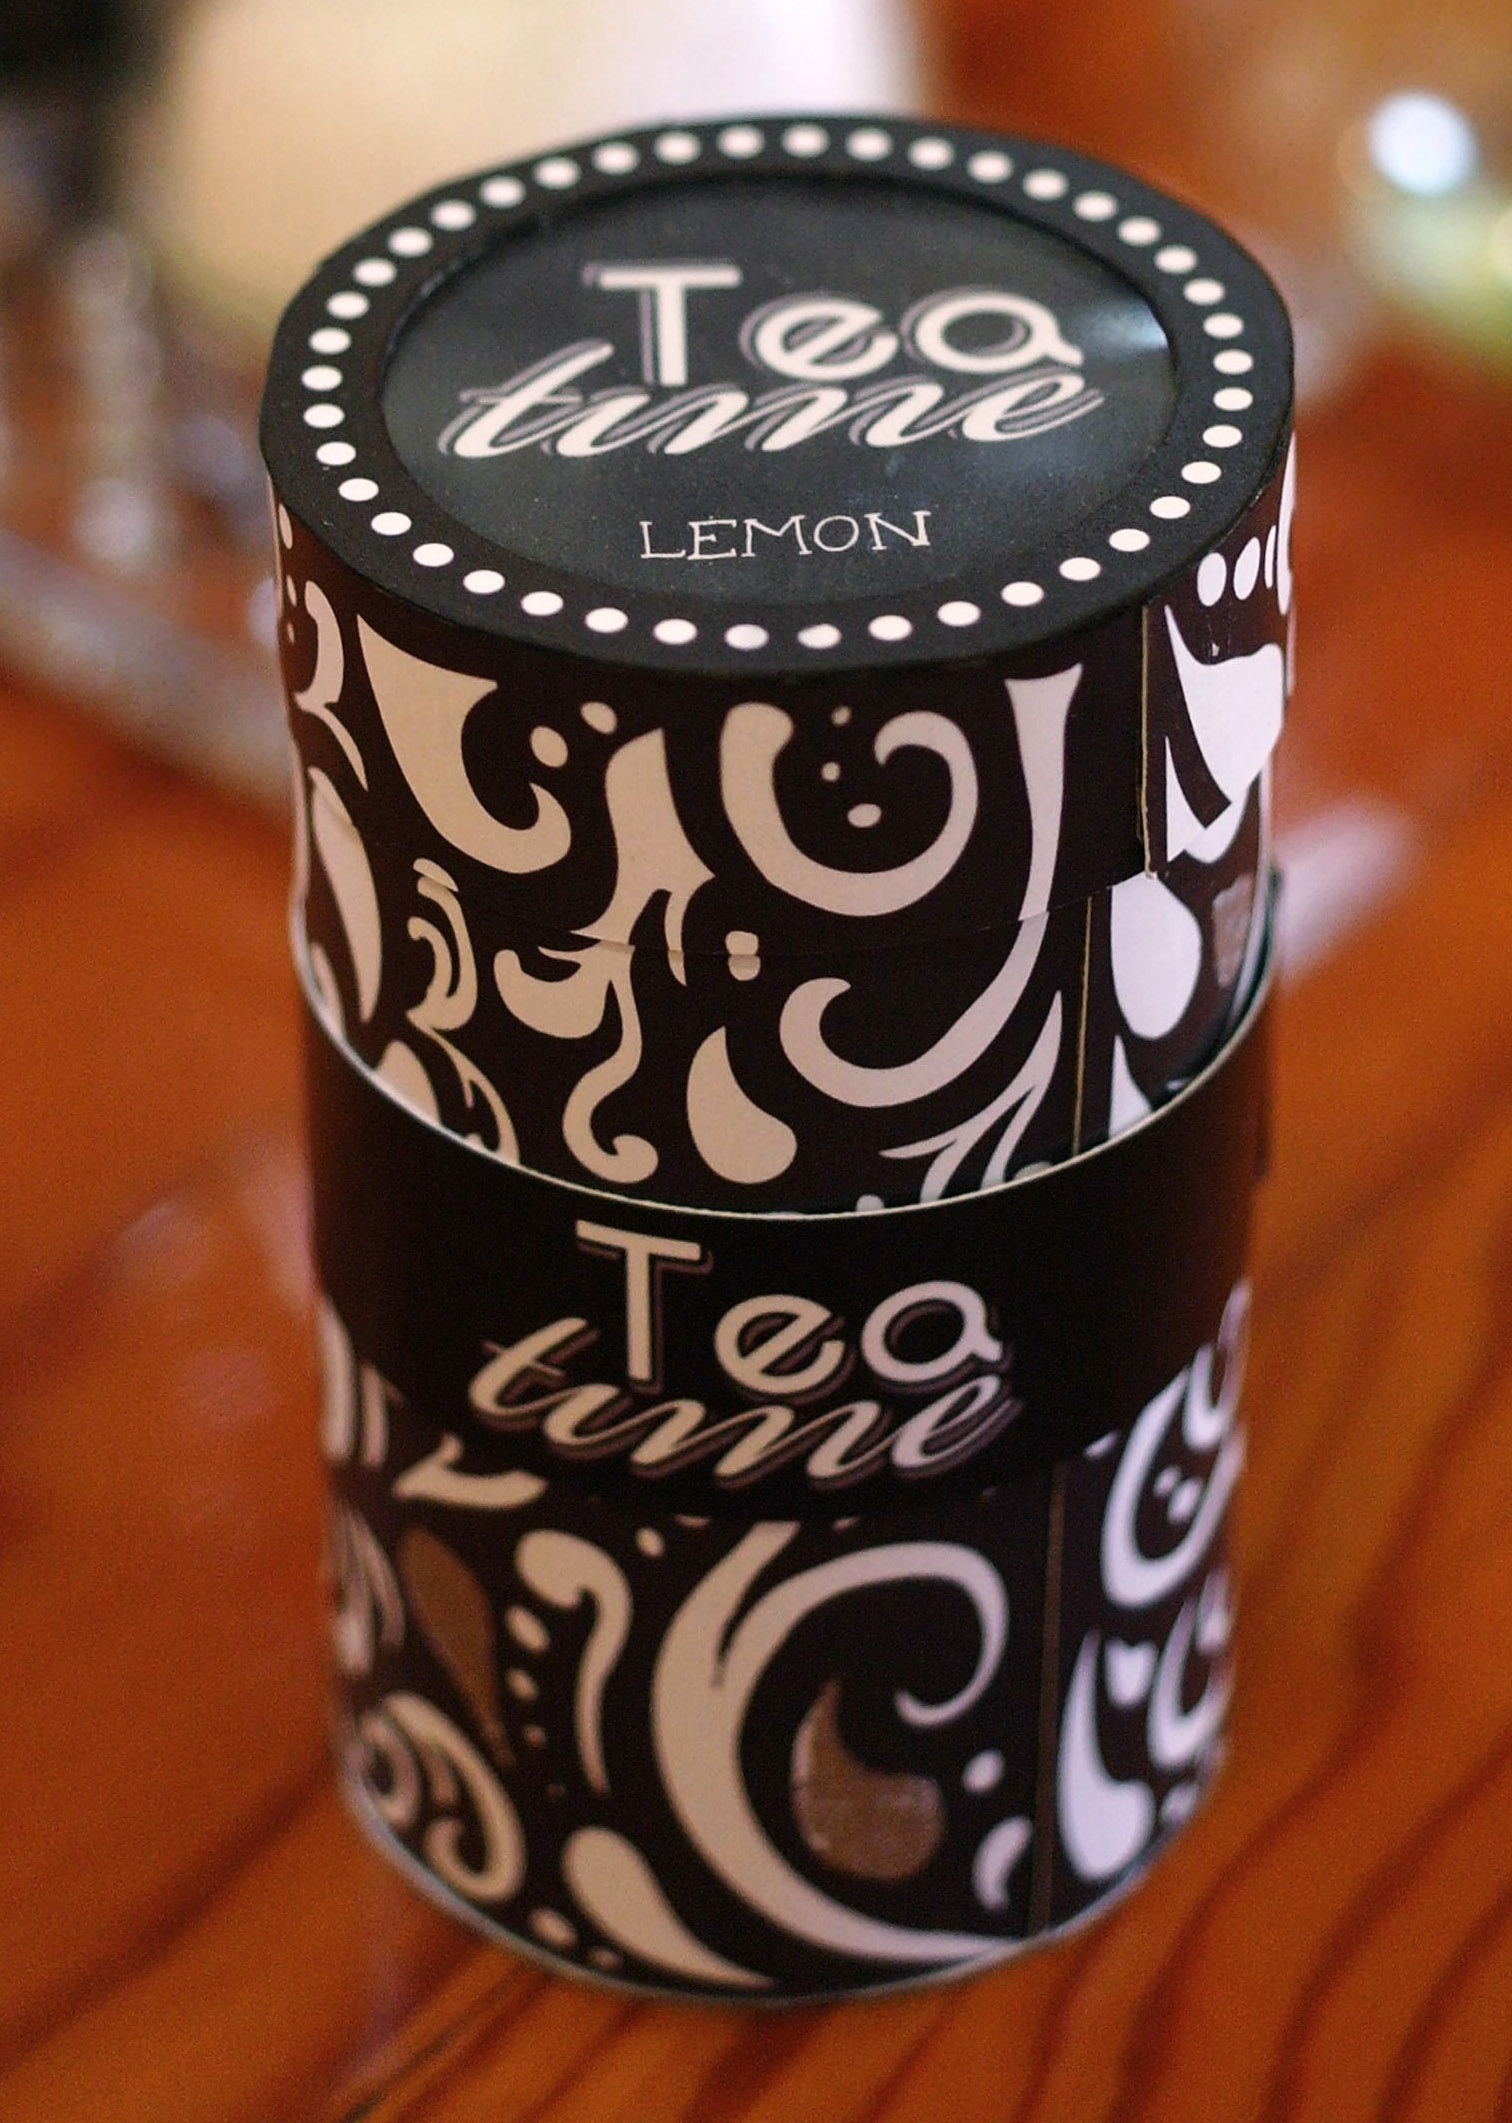  Year 1 - This project was for the Southern Cross Packaging Design contest. Our task was to create new packaging for tea. I was awarded a commendation.&nbsp; 